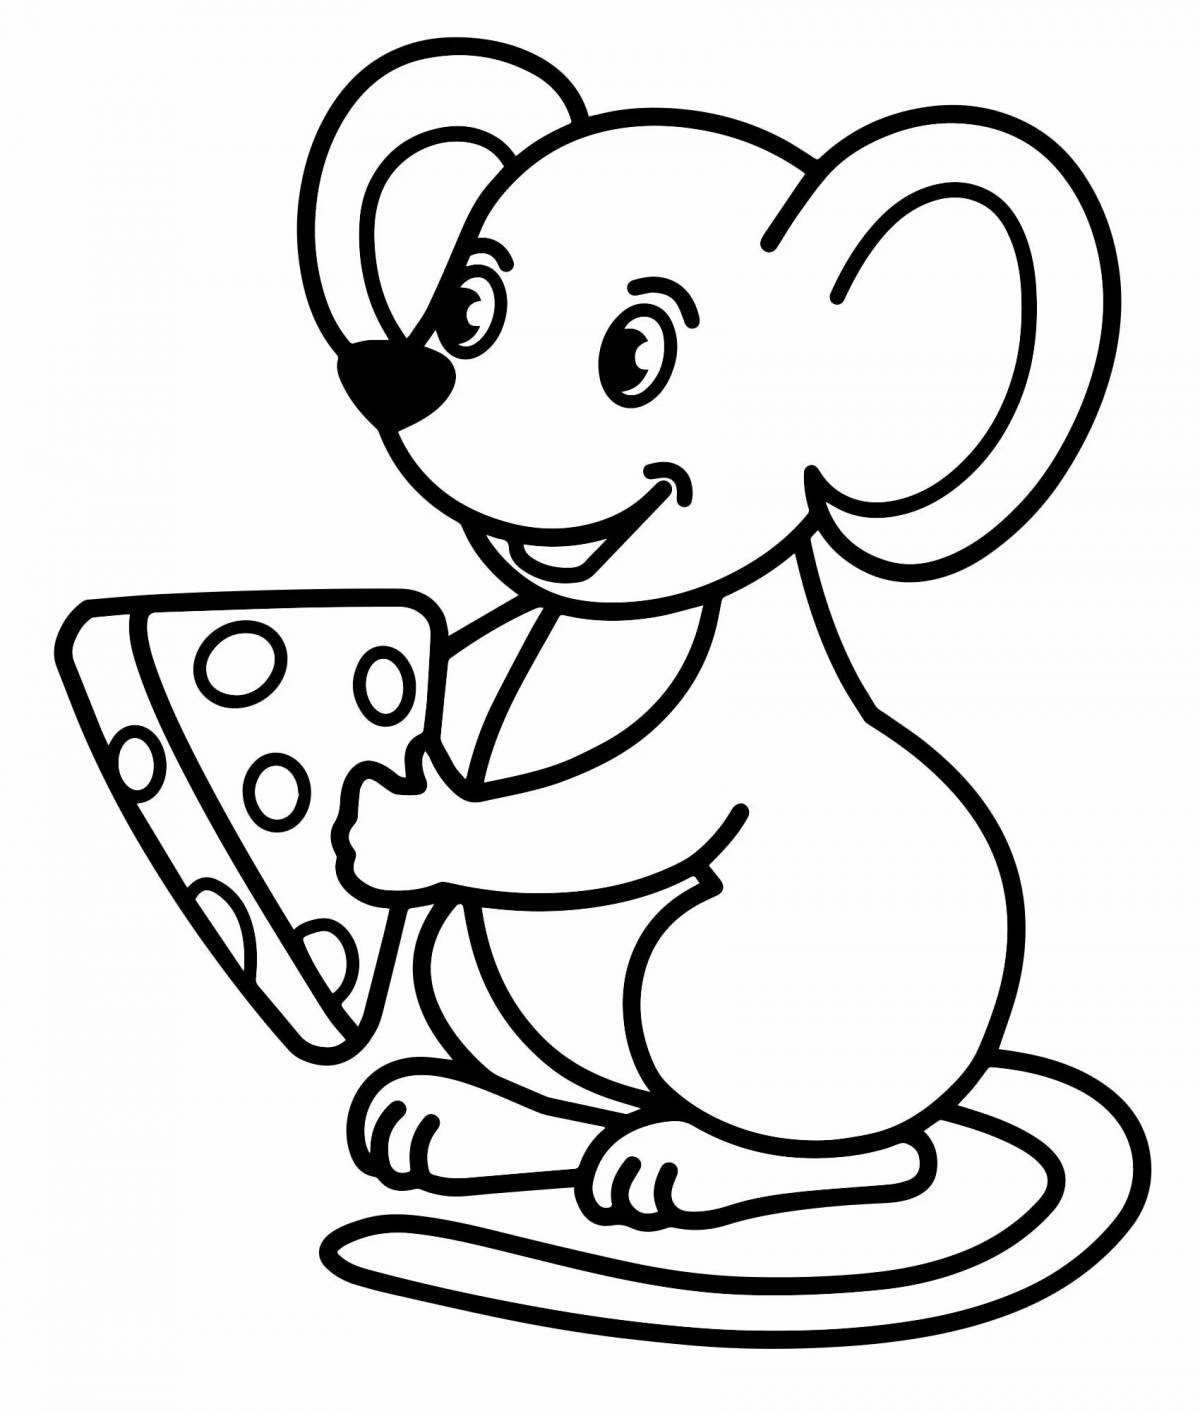 Cute mouse and bear coloring pages